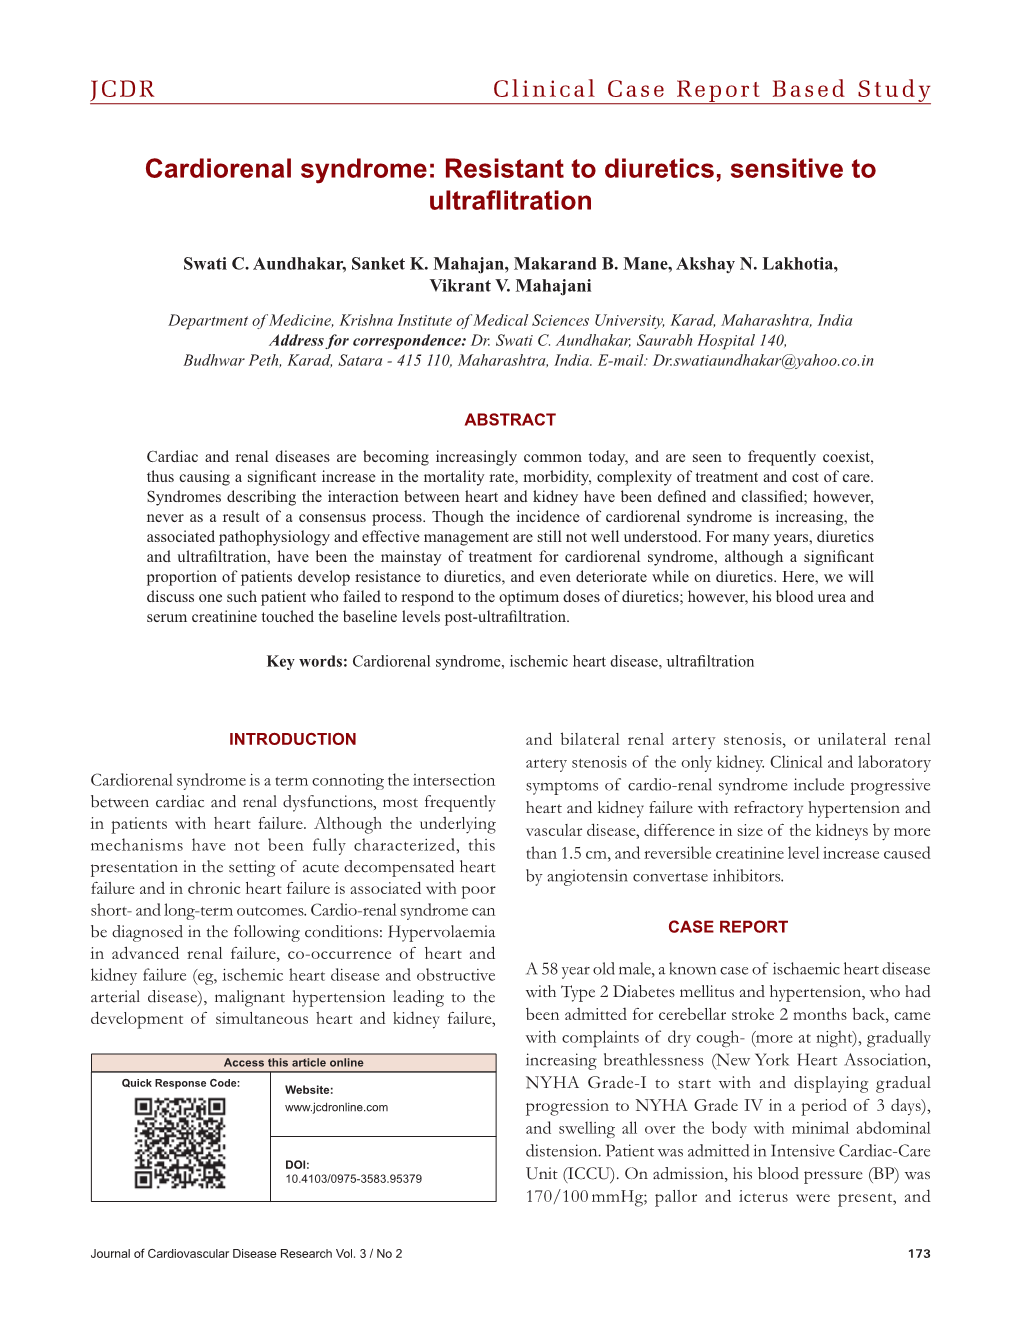 Cardiorenal Syndrome: Resistant to Diuretics, Sensitive to Ultraflitration